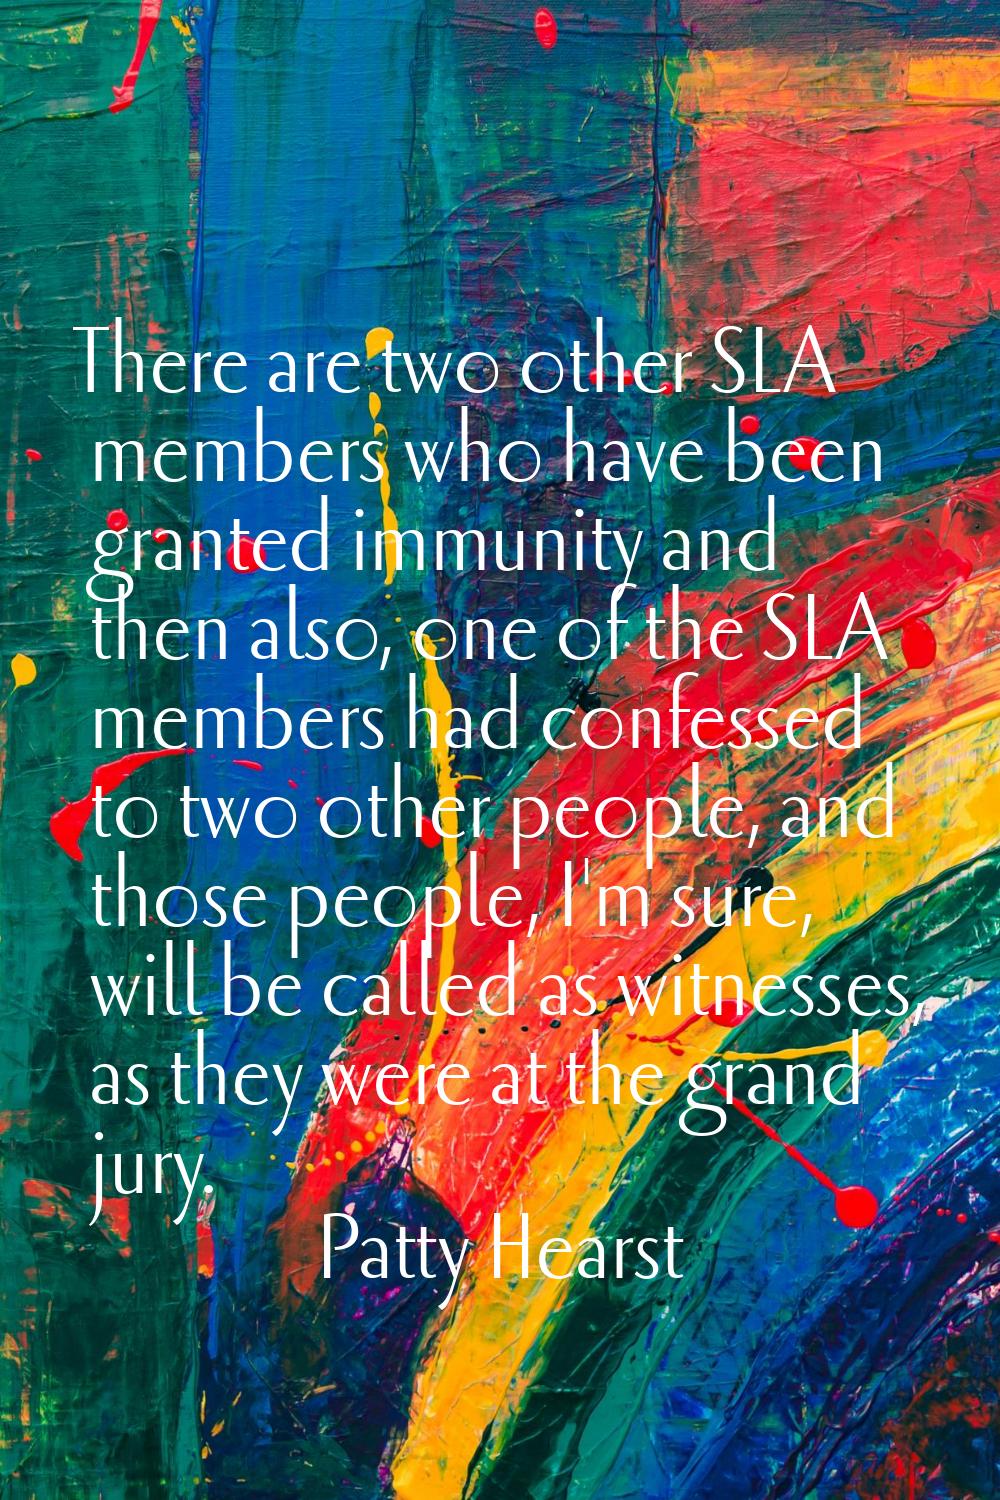 There are two other SLA members who have been granted immunity and then also, one of the SLA member